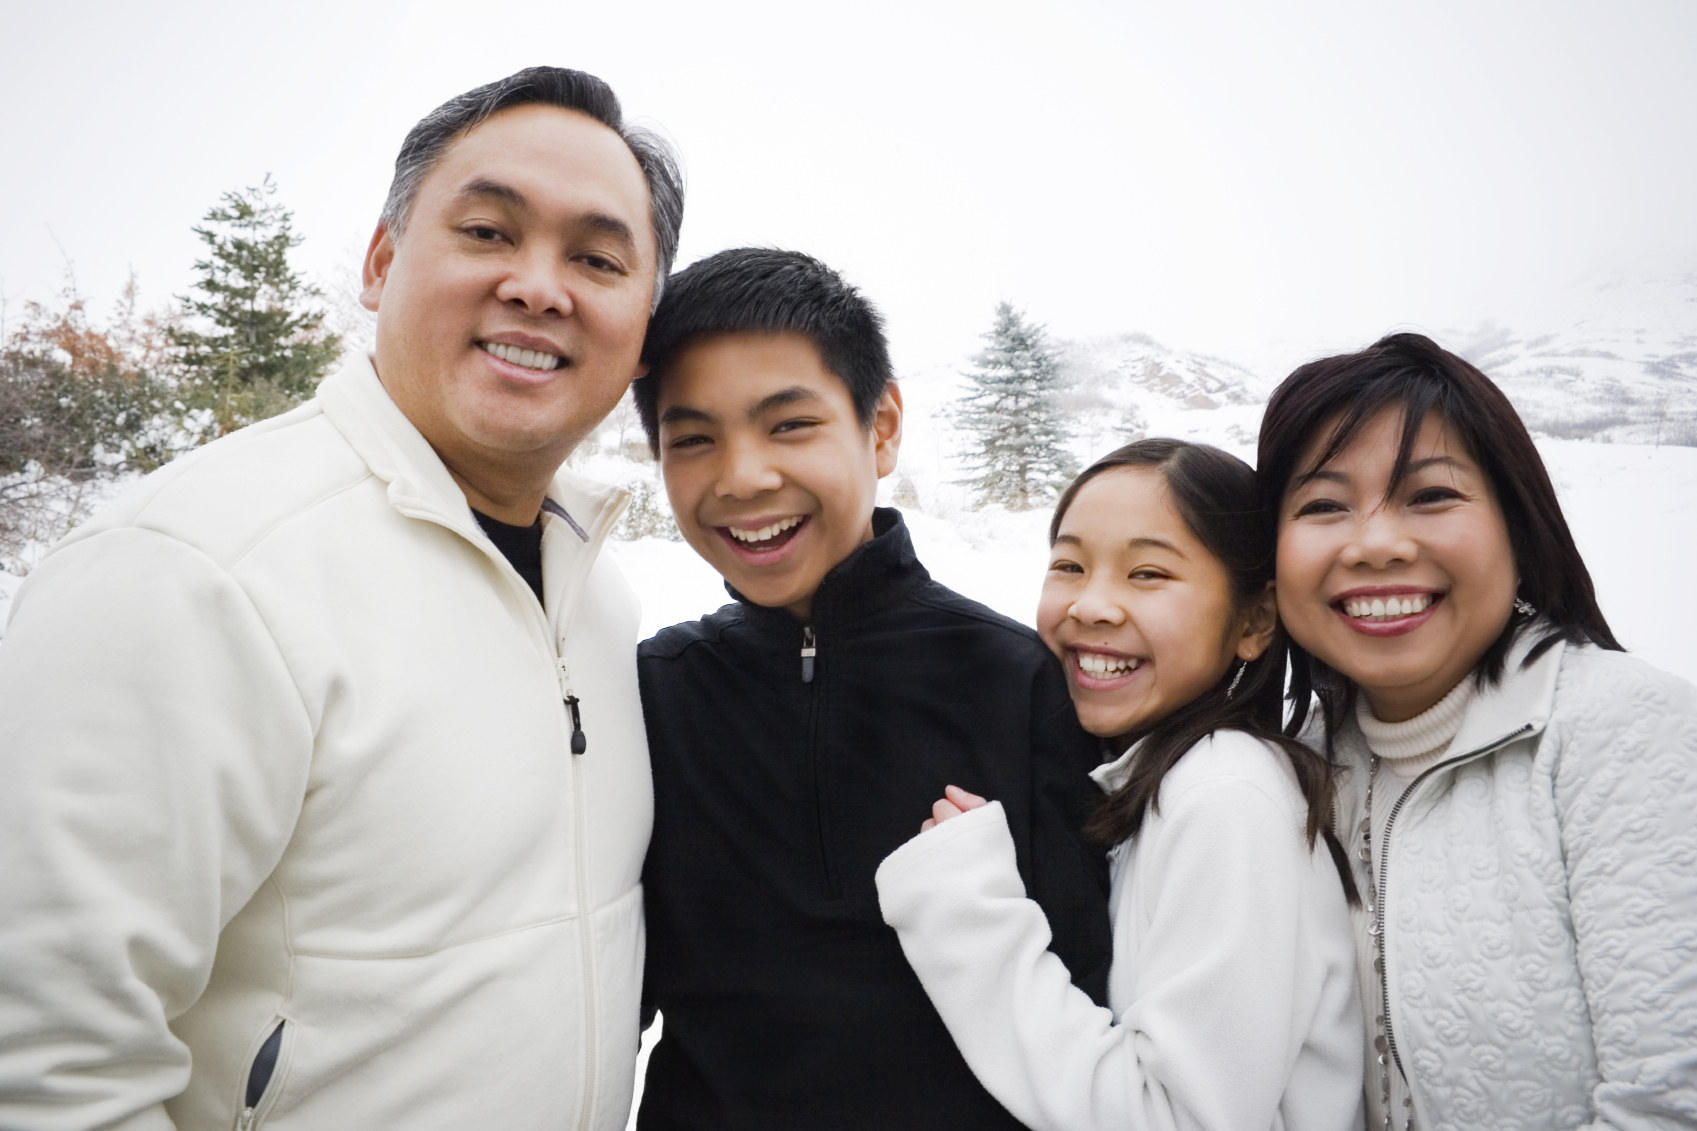 Winter portrait of a beautiful Asian family.